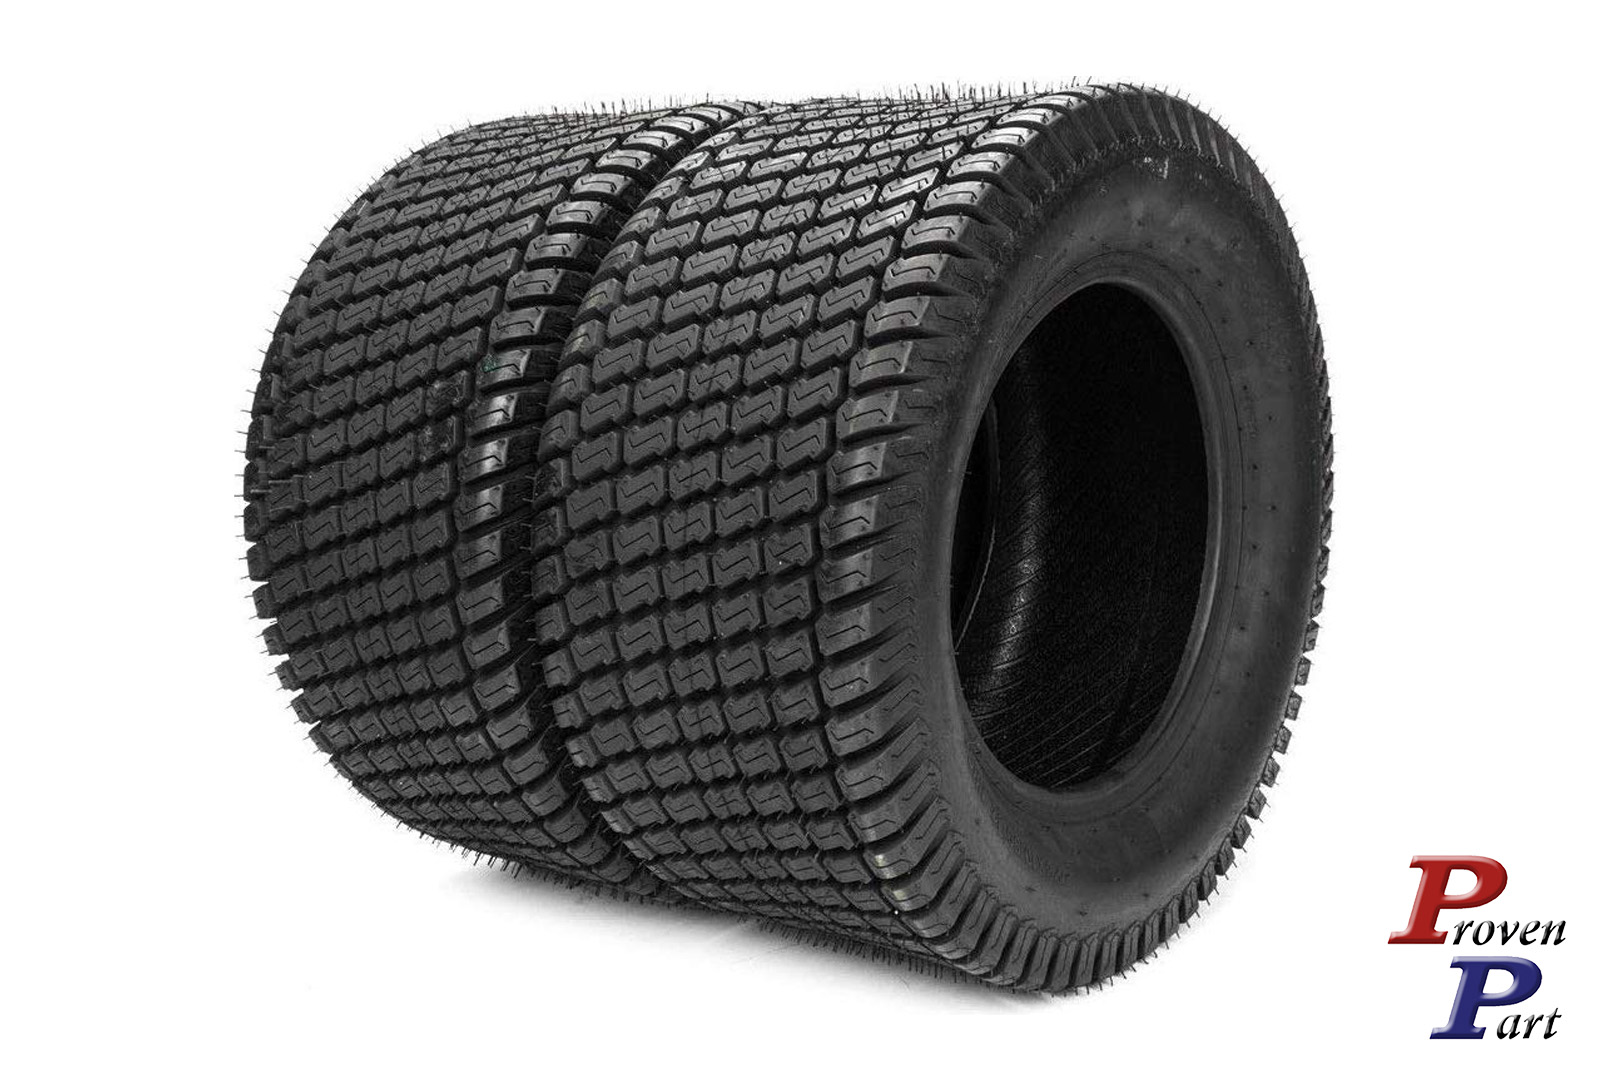 2 tubeless riding mower ProMaster tires 24X9.50-12 4 ply